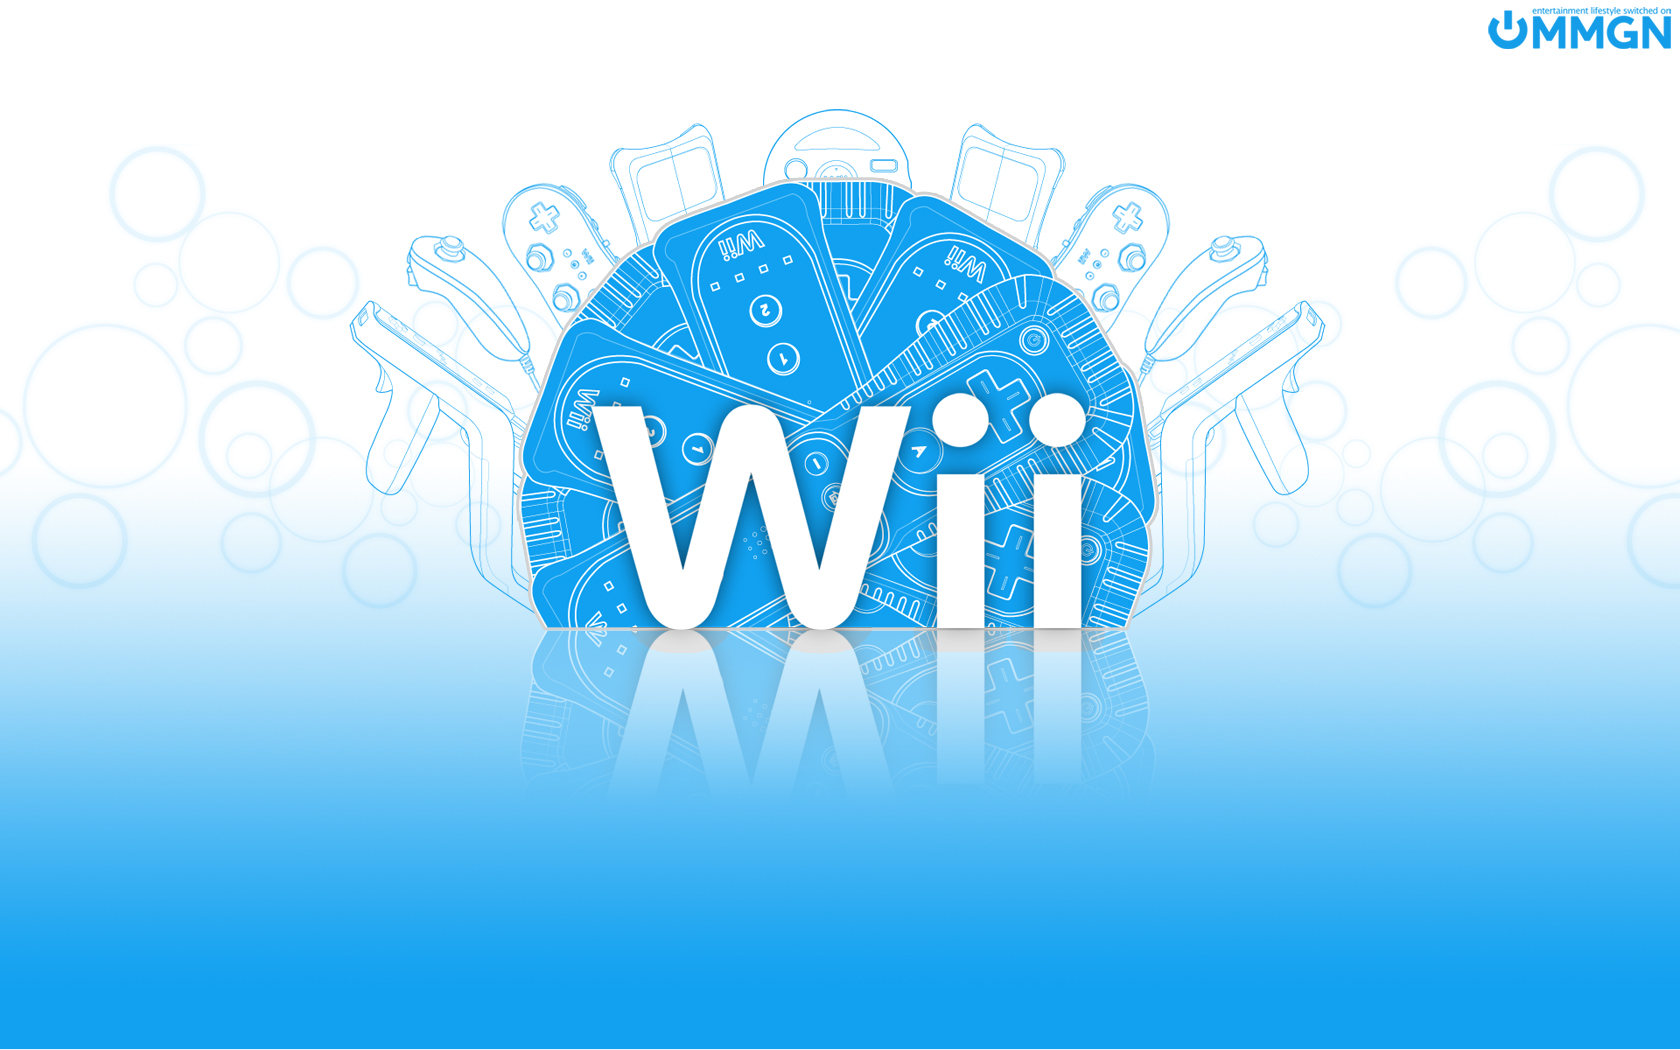 Check Out The Latest Wii Mmgn Wallpapers For Your Desktop